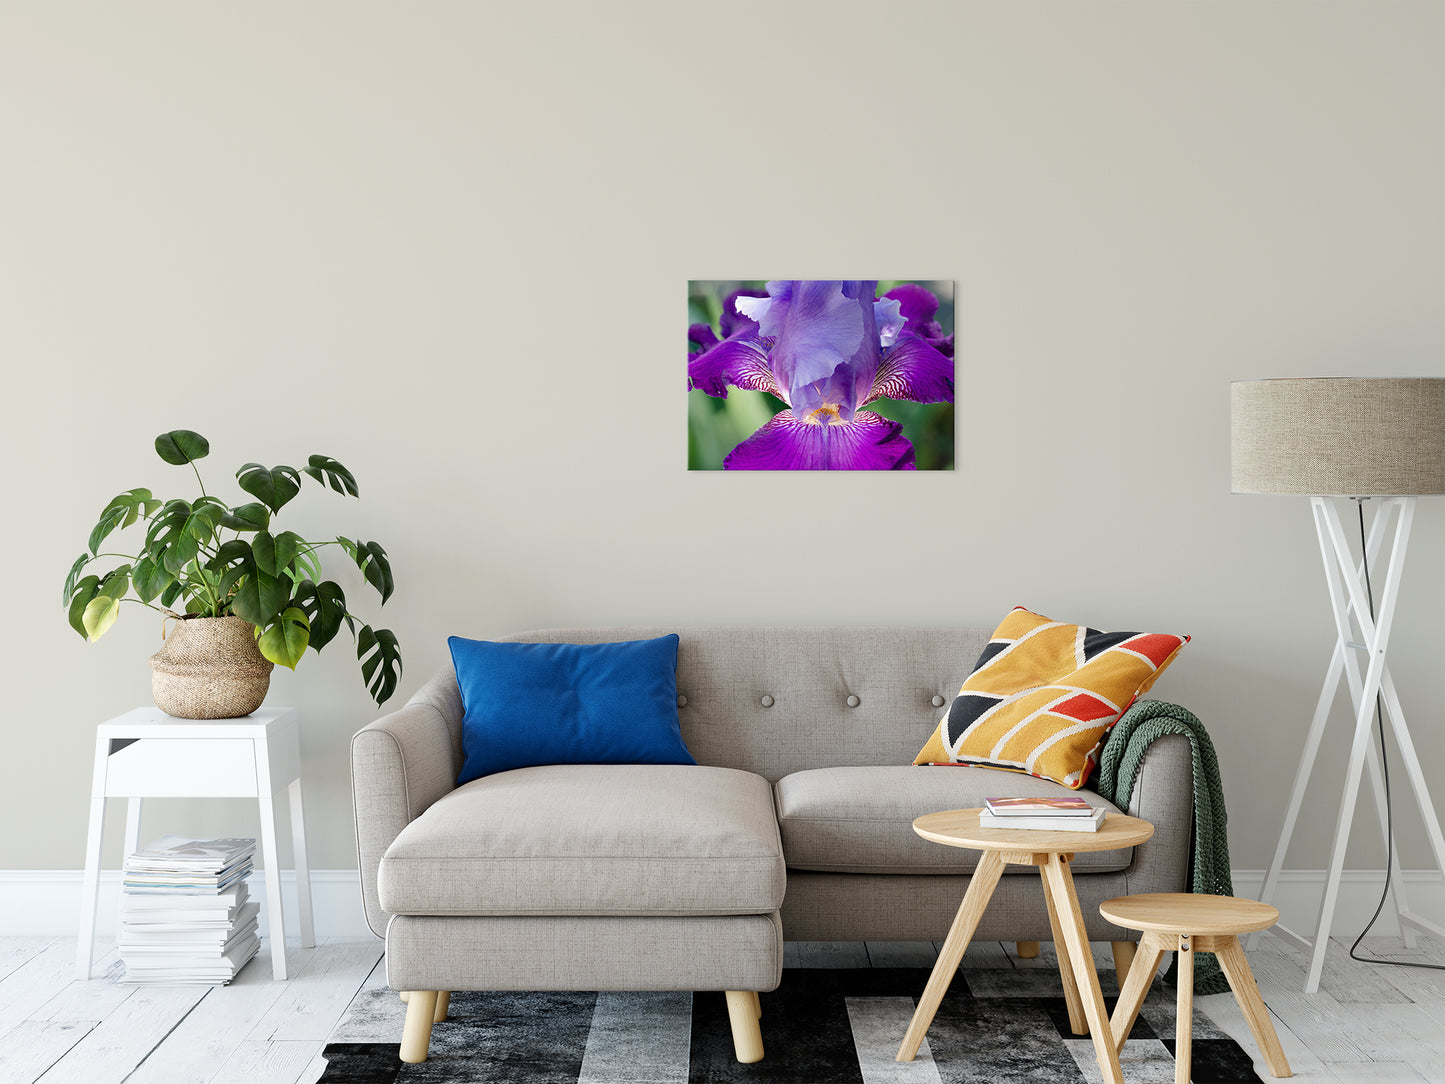 Large Wall Decor Bedroom: Glowing Iris Nature / Floral Photo Fine Art Canvas Wall Art Prints 20" x 24" - PIPAFINEART